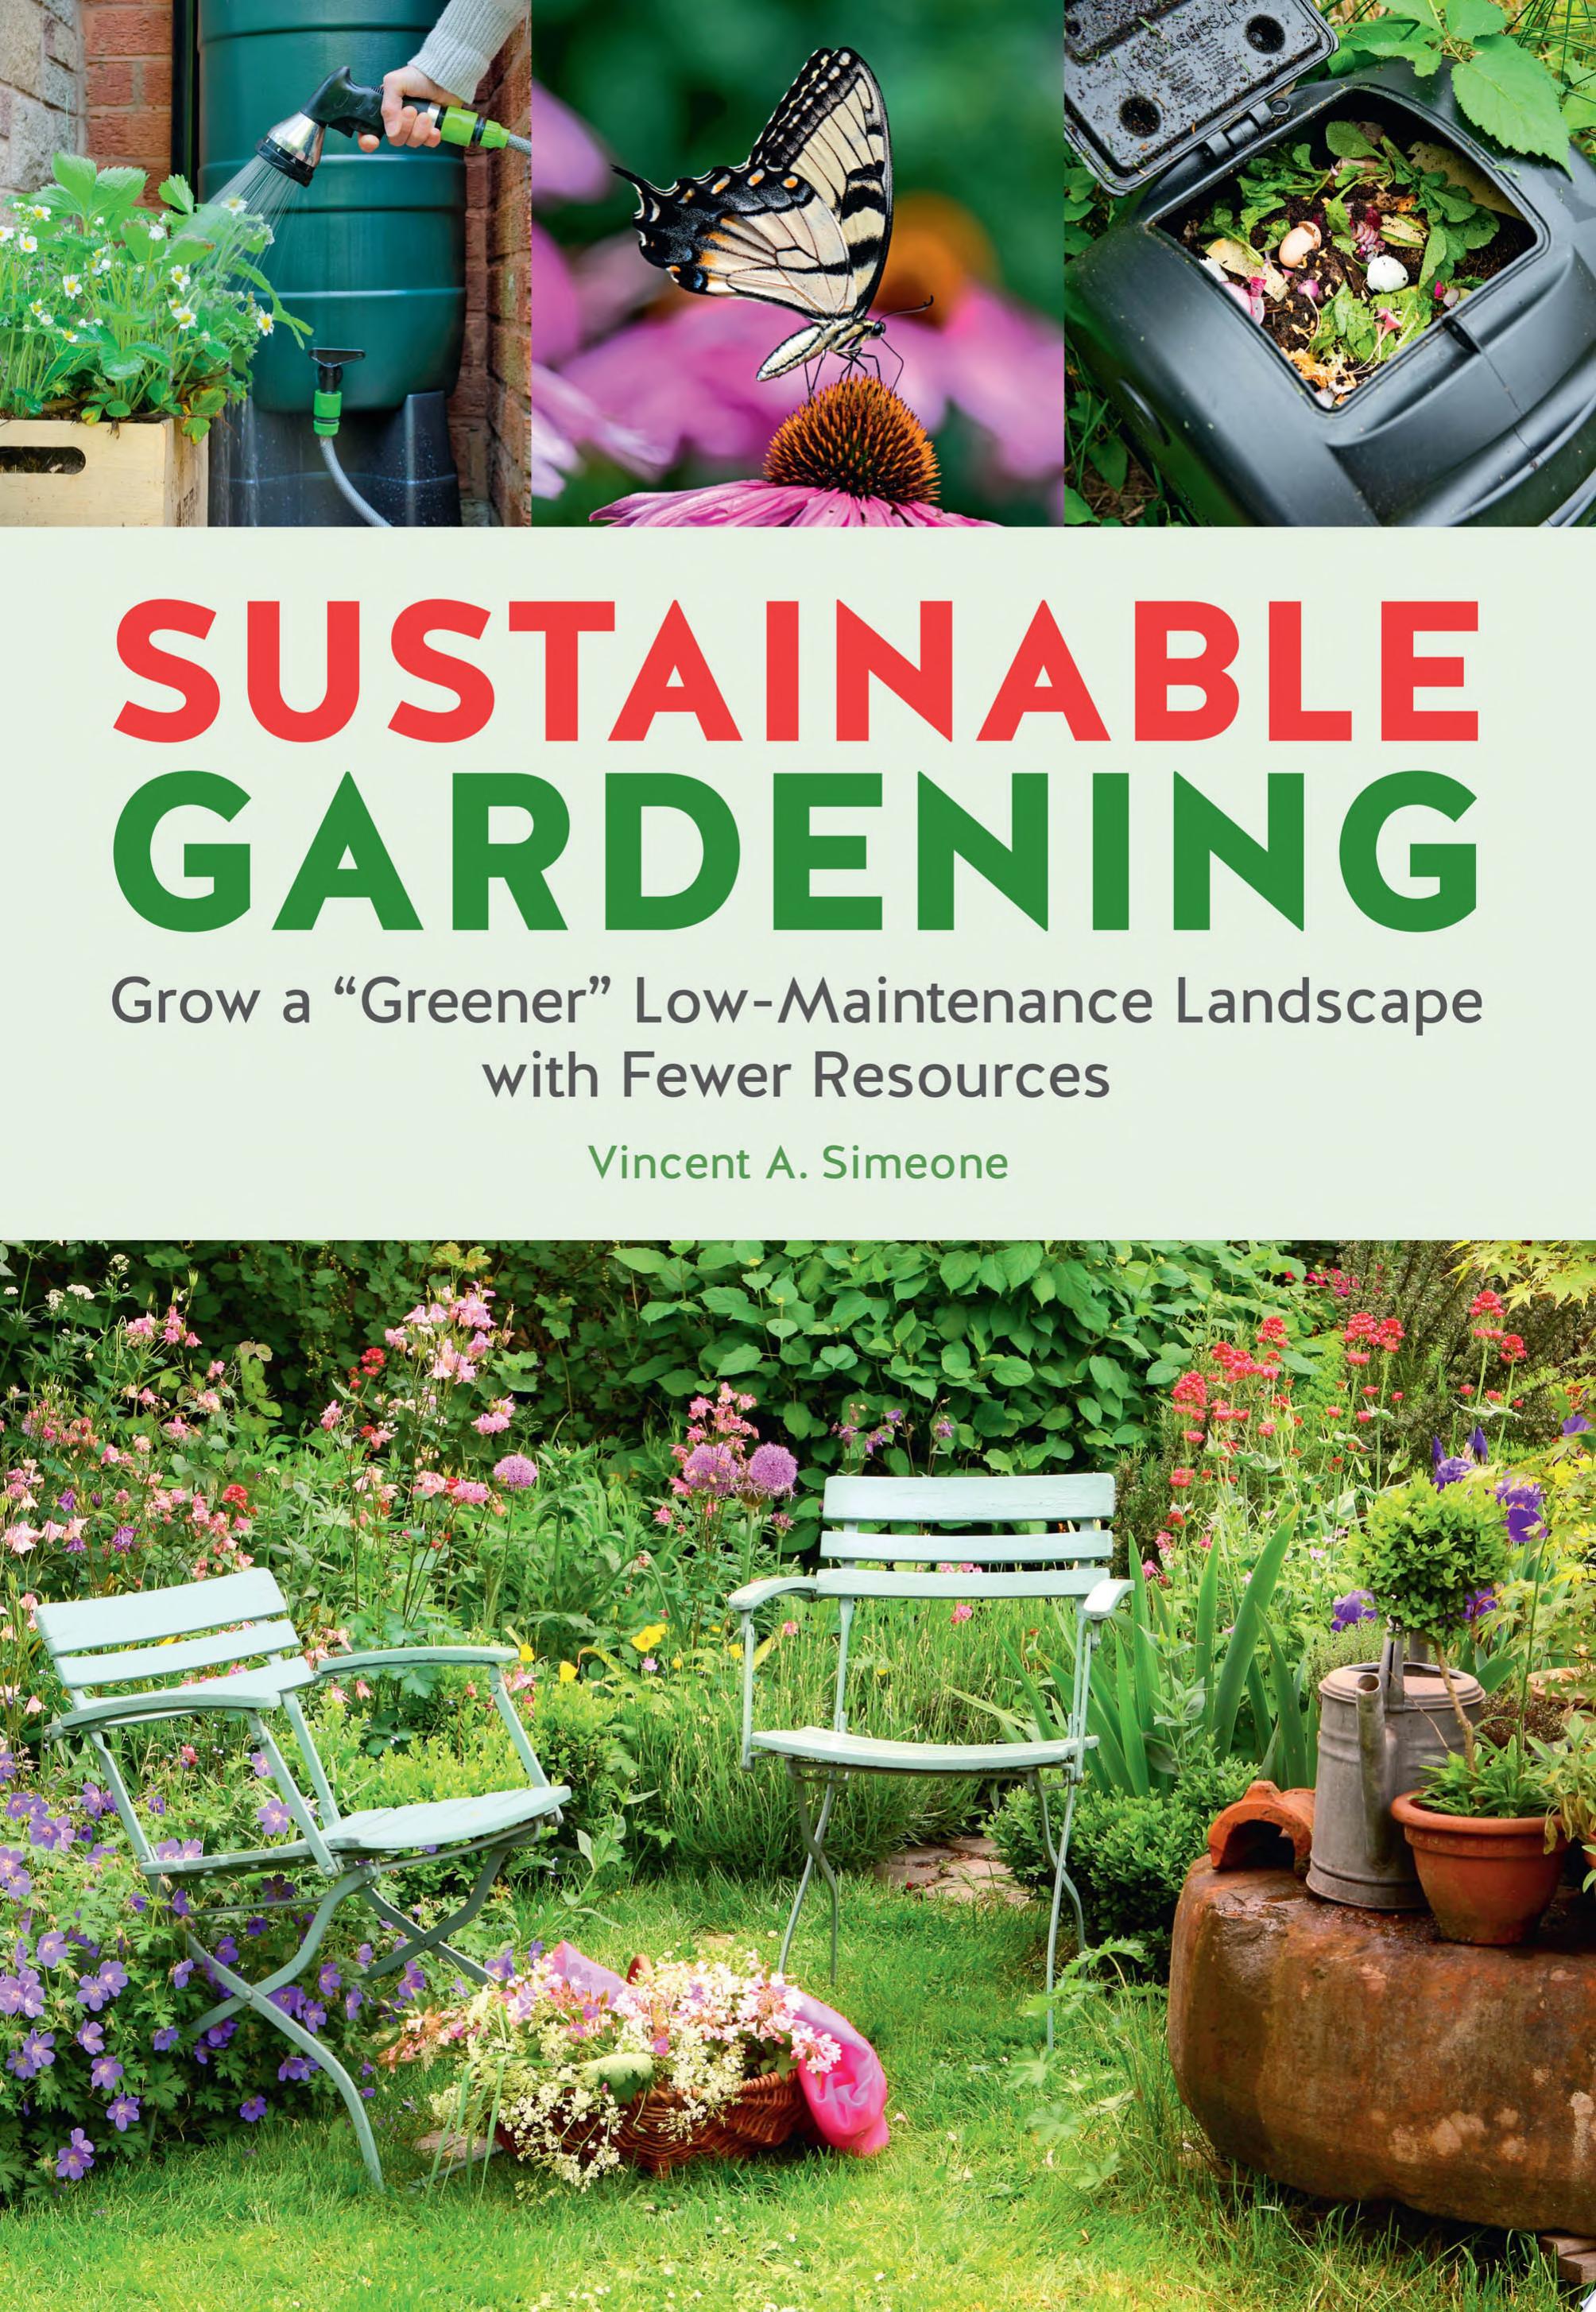 Image for "Sustainable Gardening"